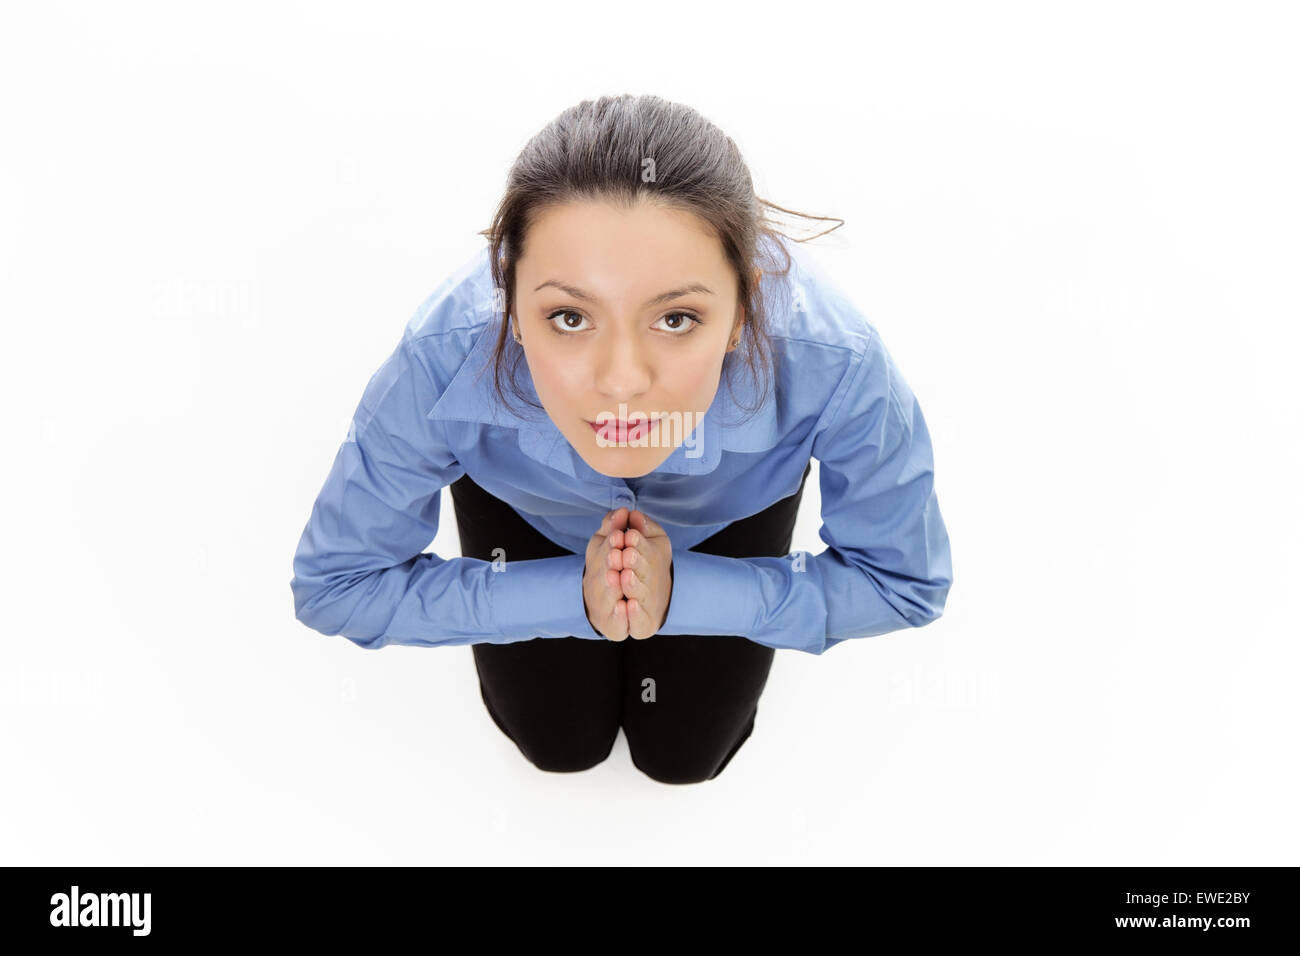 woman praying on her kneels shot from a brids eye view looking down Stock Photo